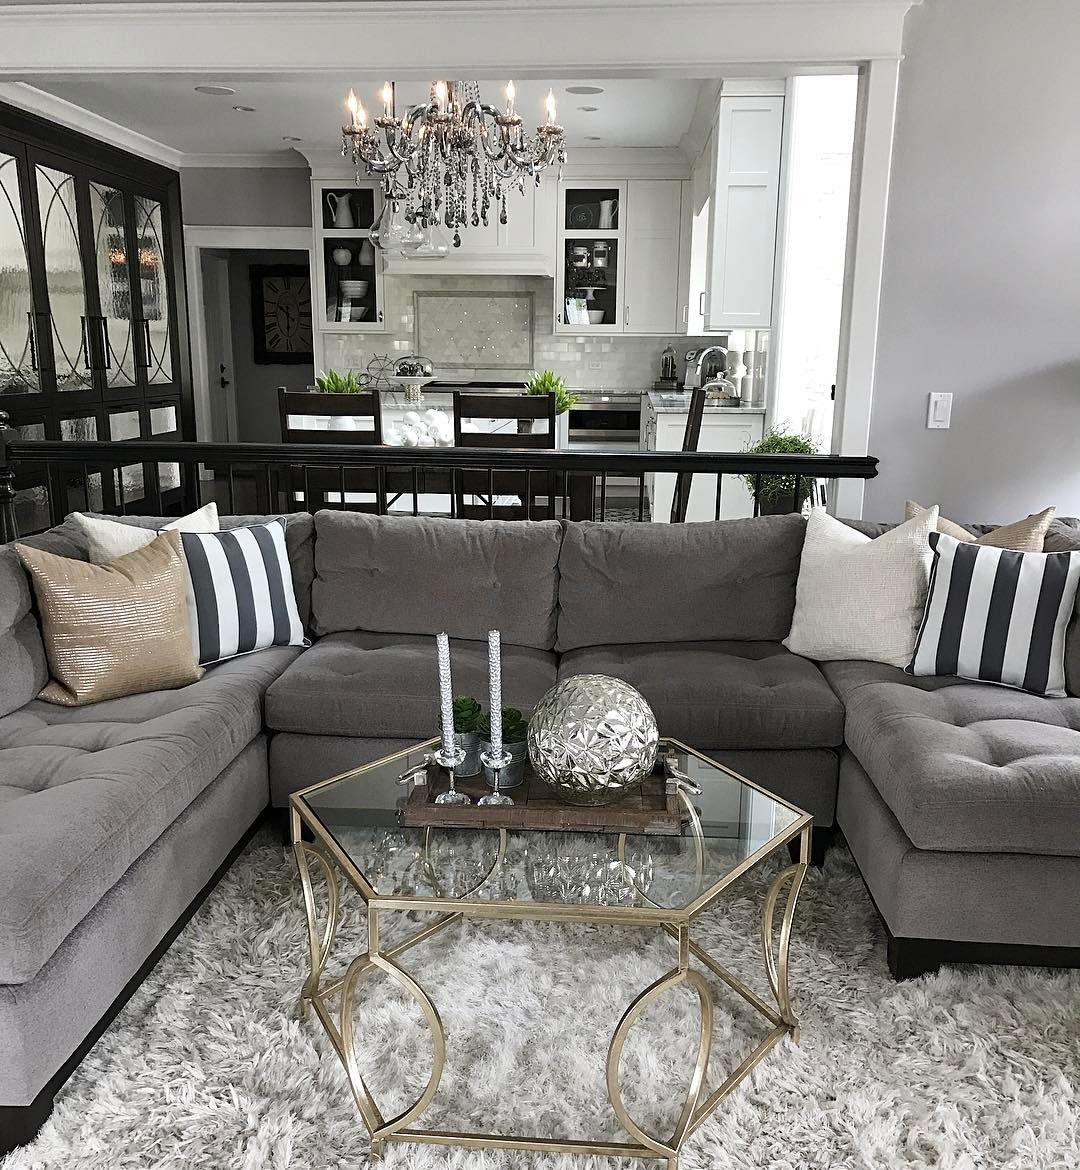 Change Up The Gray Couch With And Chic Black And White inside Gray Furniture Living Room Ideas